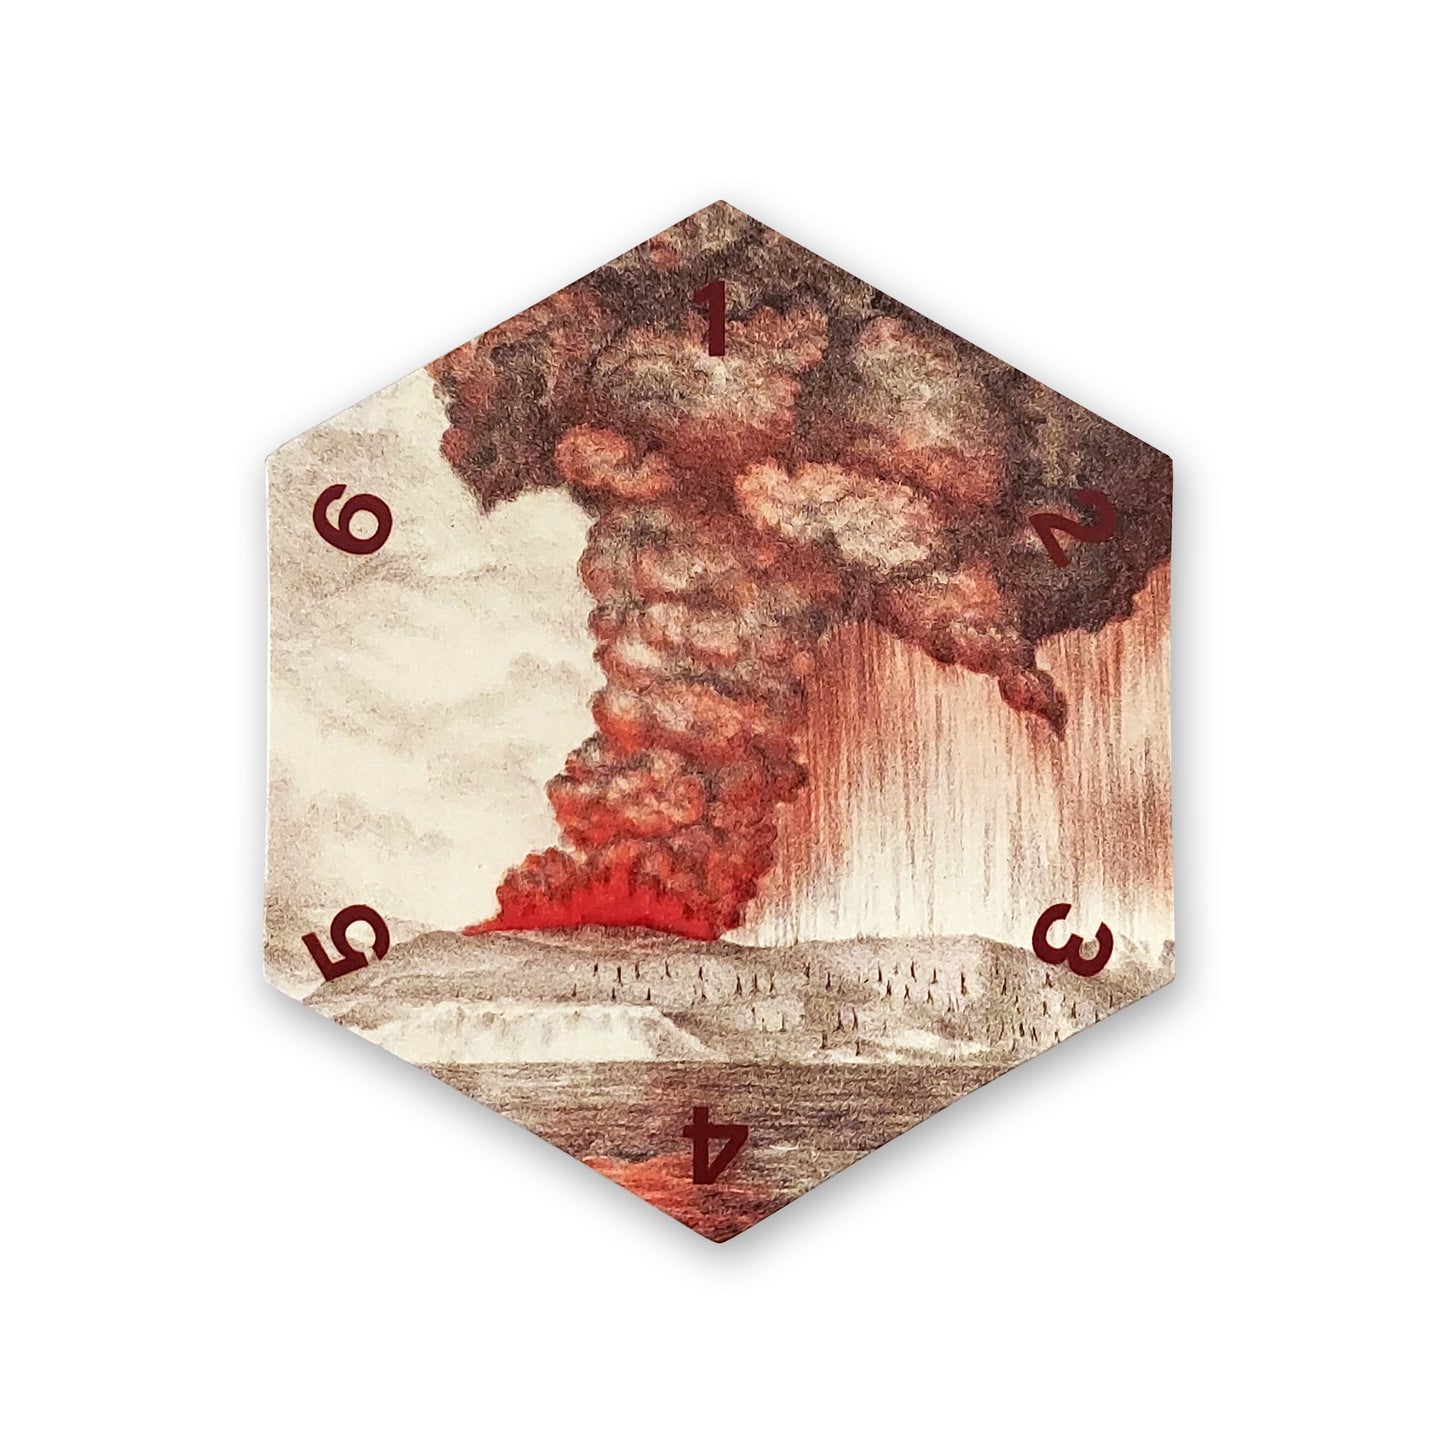 Volcano Hex - 1883 Eruption of Krakatoa Special Edition - compatible with Catan's Settlers of Catan, Seafarers & Catan Expansions